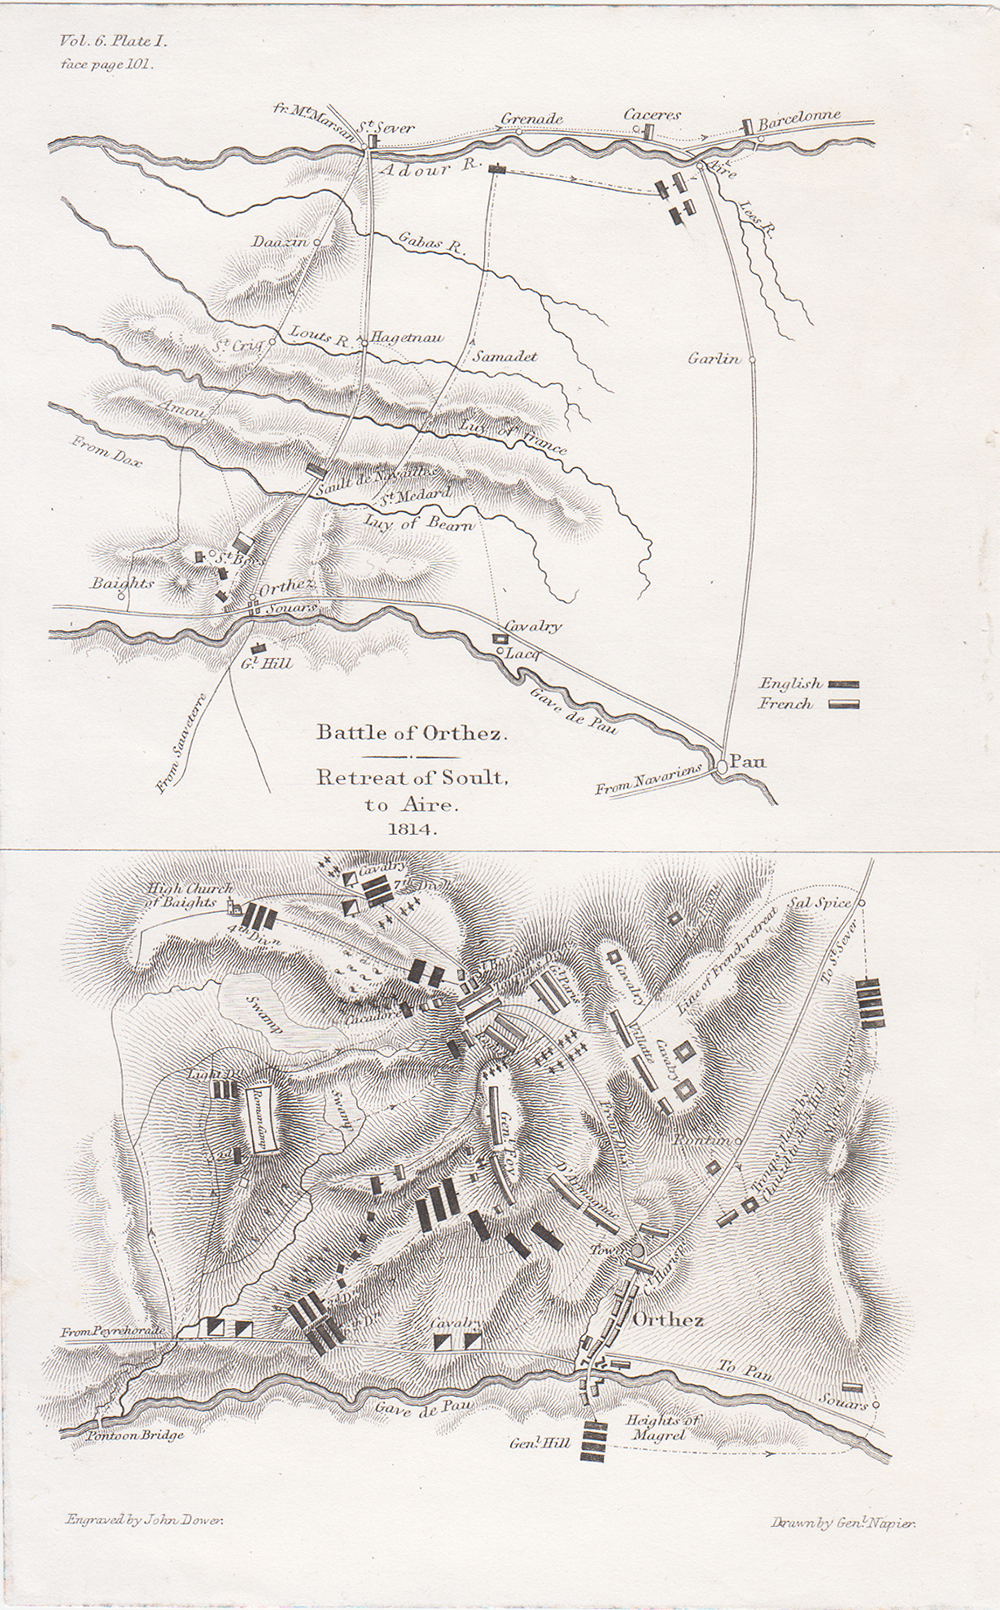 Battle of Orthez and Retreat of Soult to Aire 1814